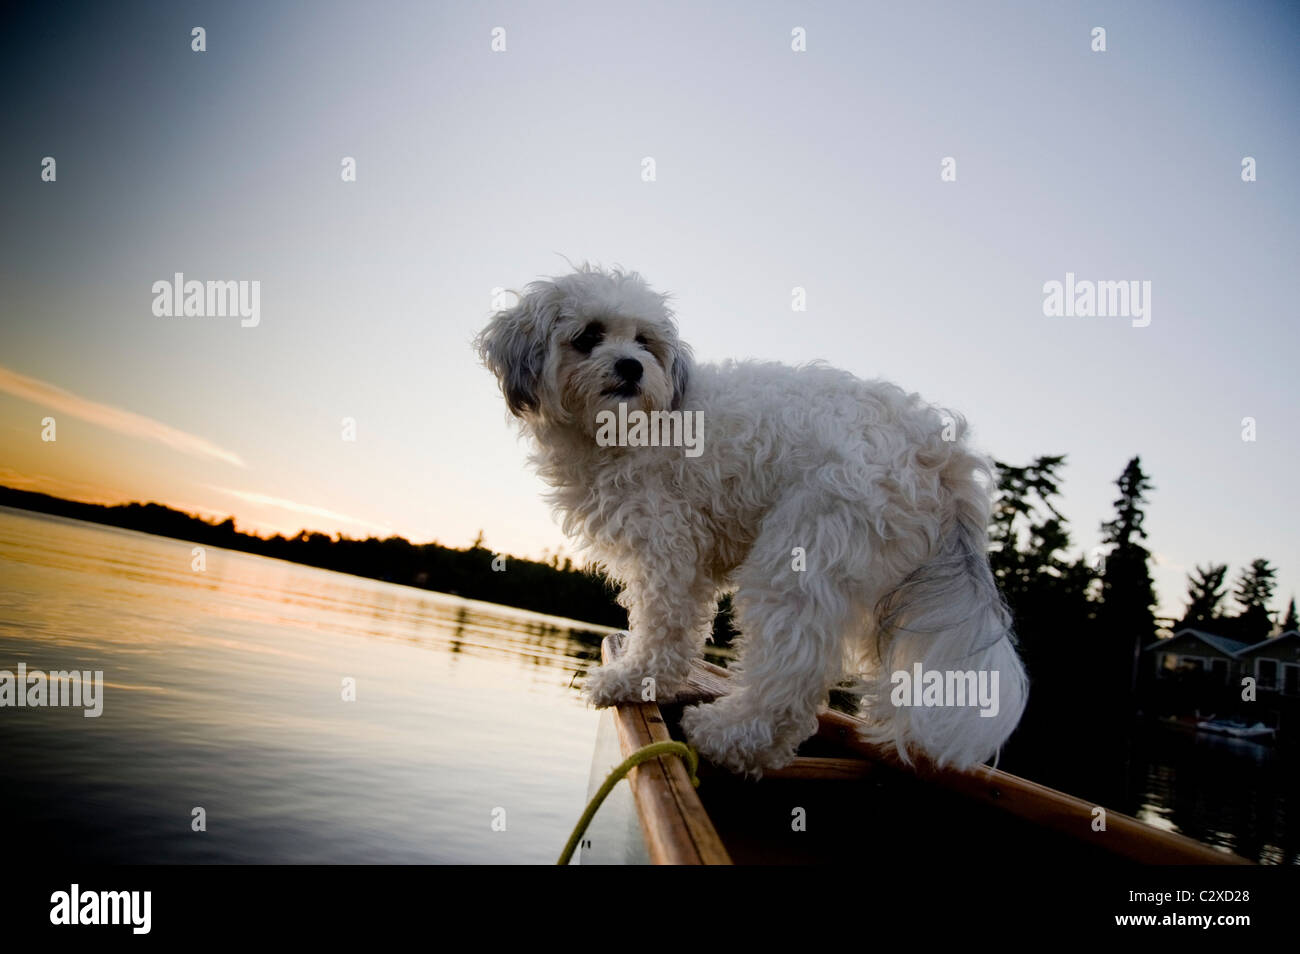 Lake Of The Woods, Ontario, Canada; White Dog Standing In Row Boat On Lake Stock Photo